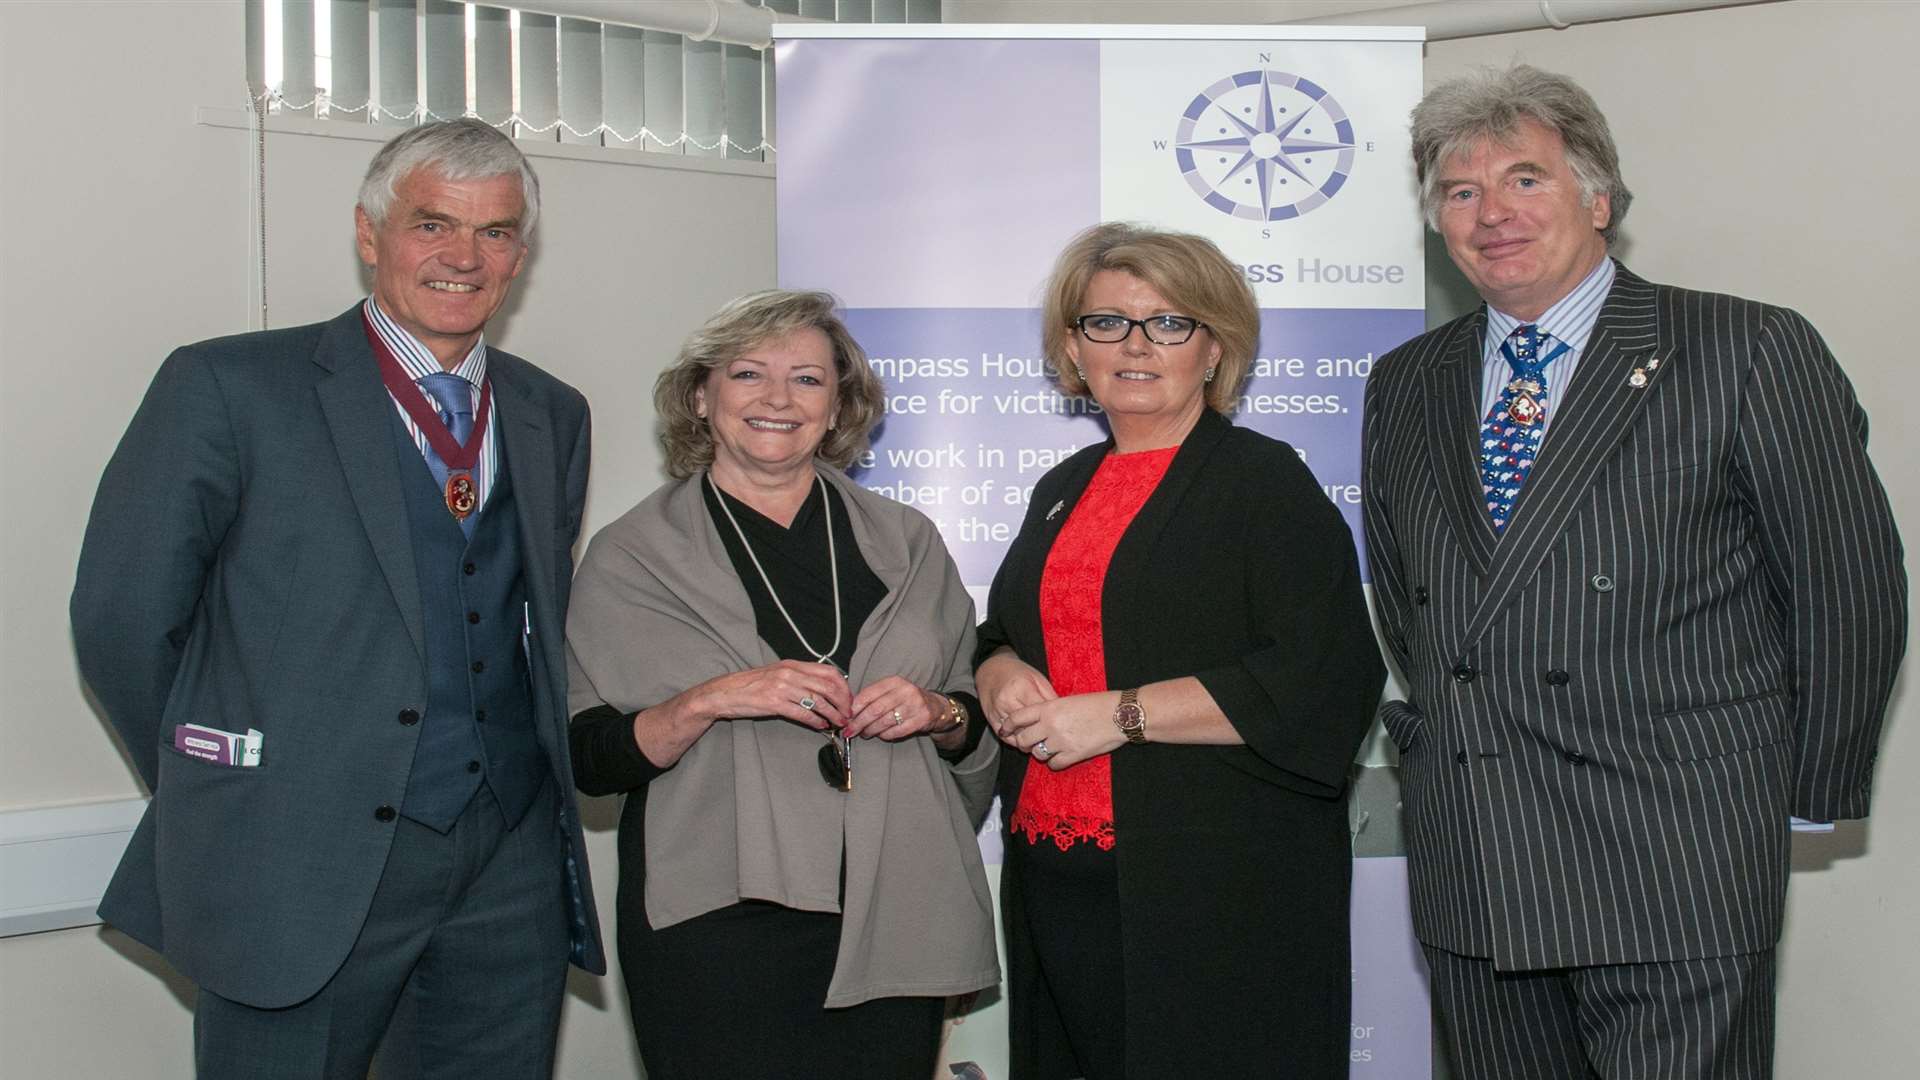 William Alexandrer, High Sheriff of Kent, Ann Barnes, Kent Police and Crime Commissioner, Baroness Helen Newlove, Victims' Commissioner and George Jessup, Deputy Lord Leiutenant